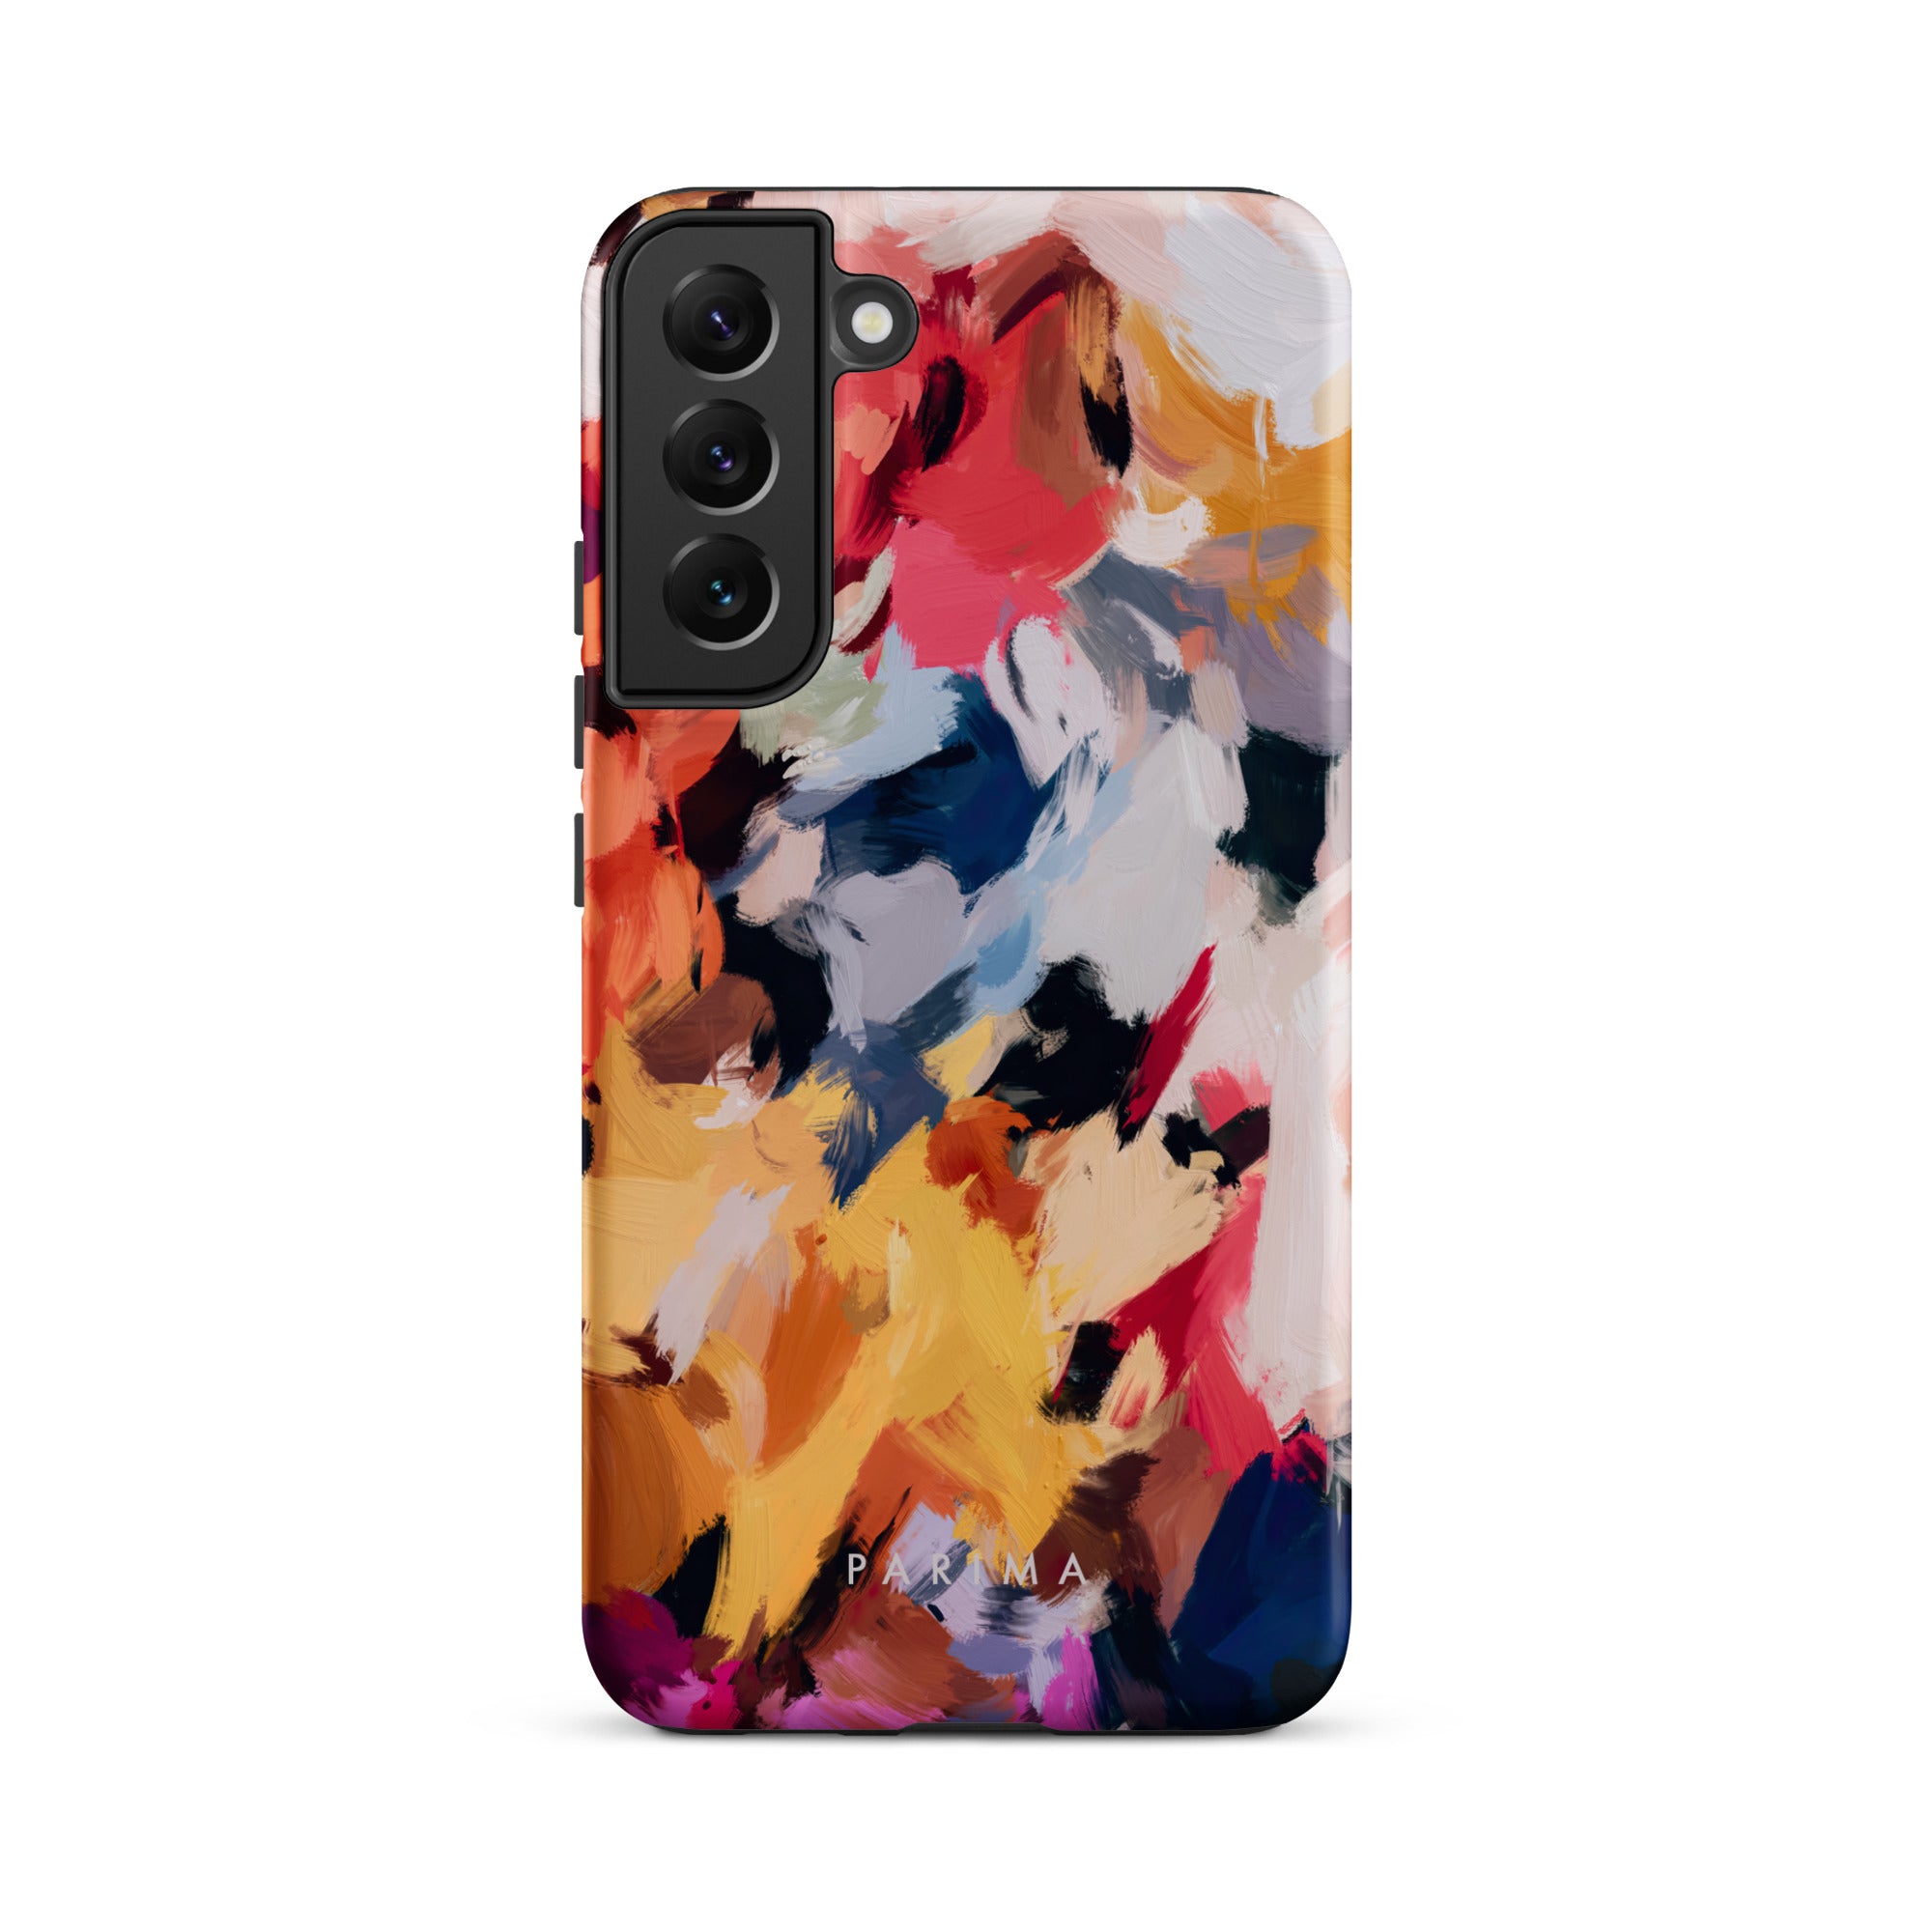 Wilde, blue and yellow multicolor abstract art on Samsung Galaxy S22 Plus tough case by Parima Studio